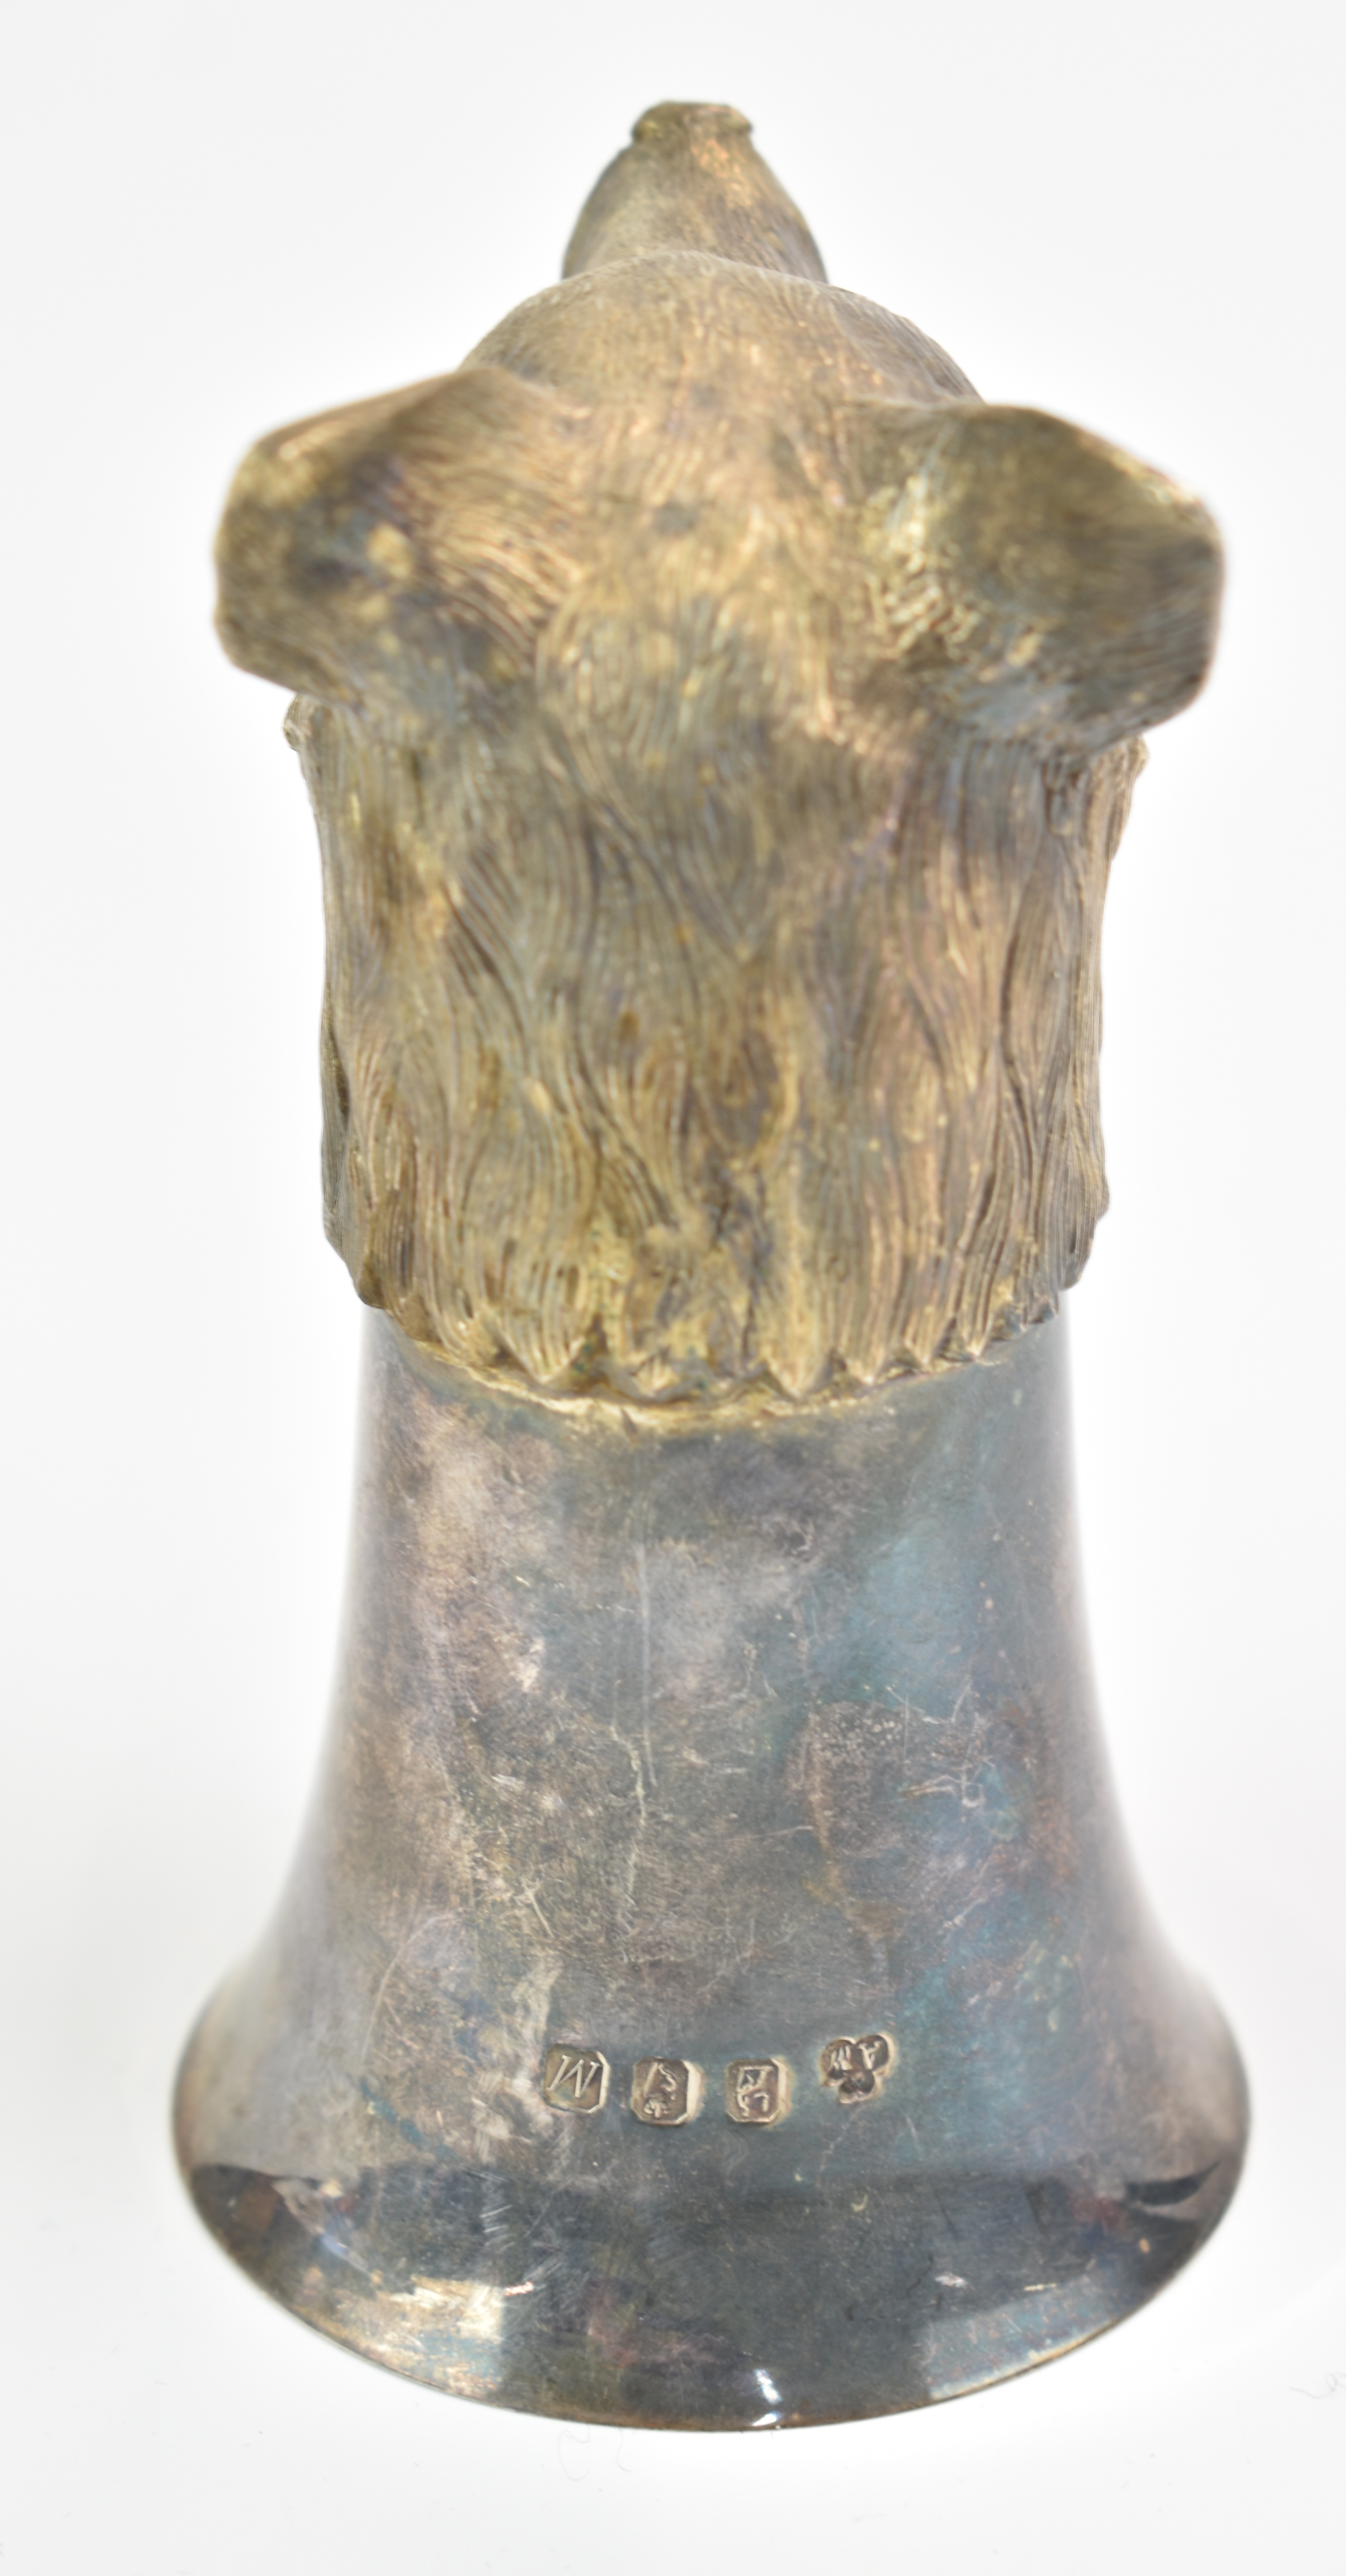 Irish hallmarked silver novelty stirrup cup formed as a fox's head, Dublin 1998, maker Alwright & - Image 3 of 4